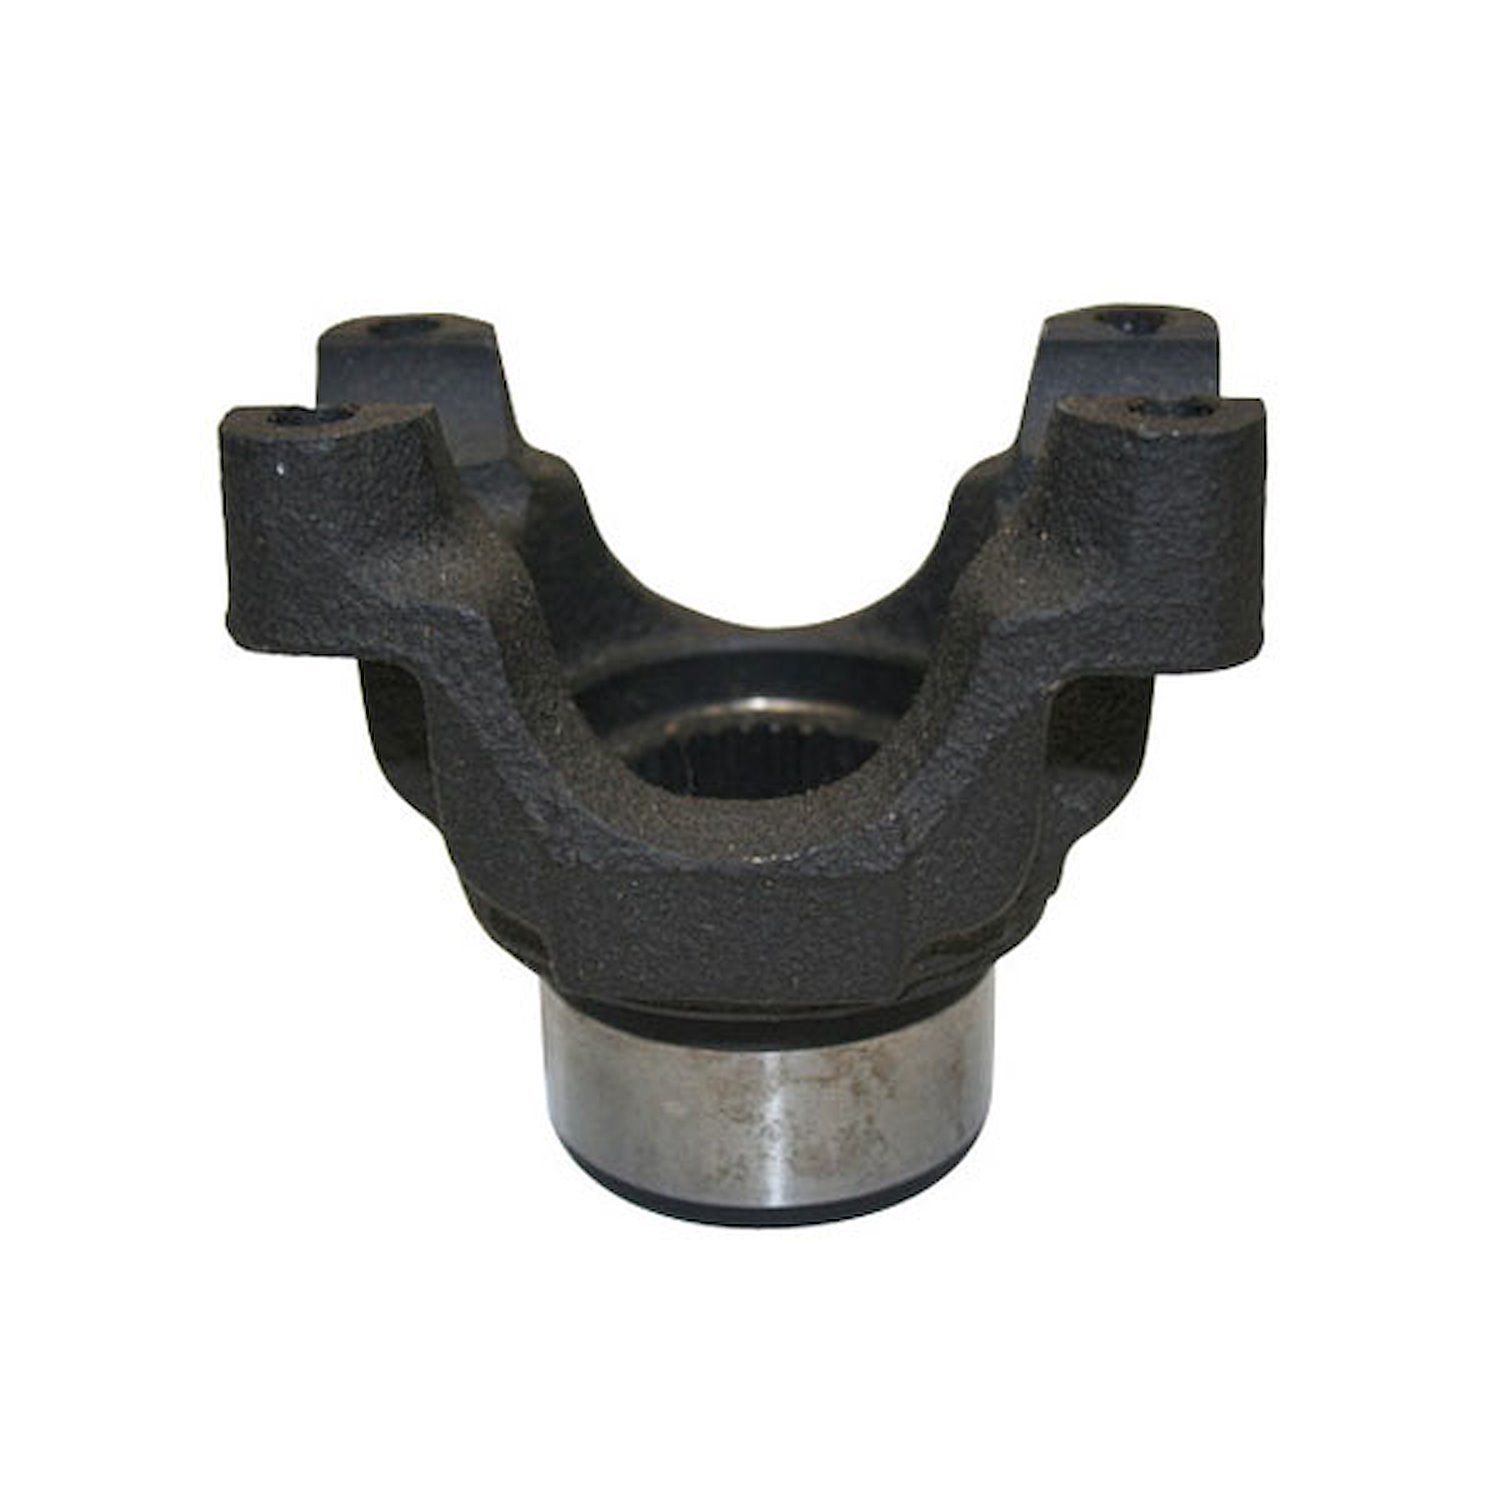 This 26 spline yoke from Omix-ADA is for Dana 44s with tapered axles.